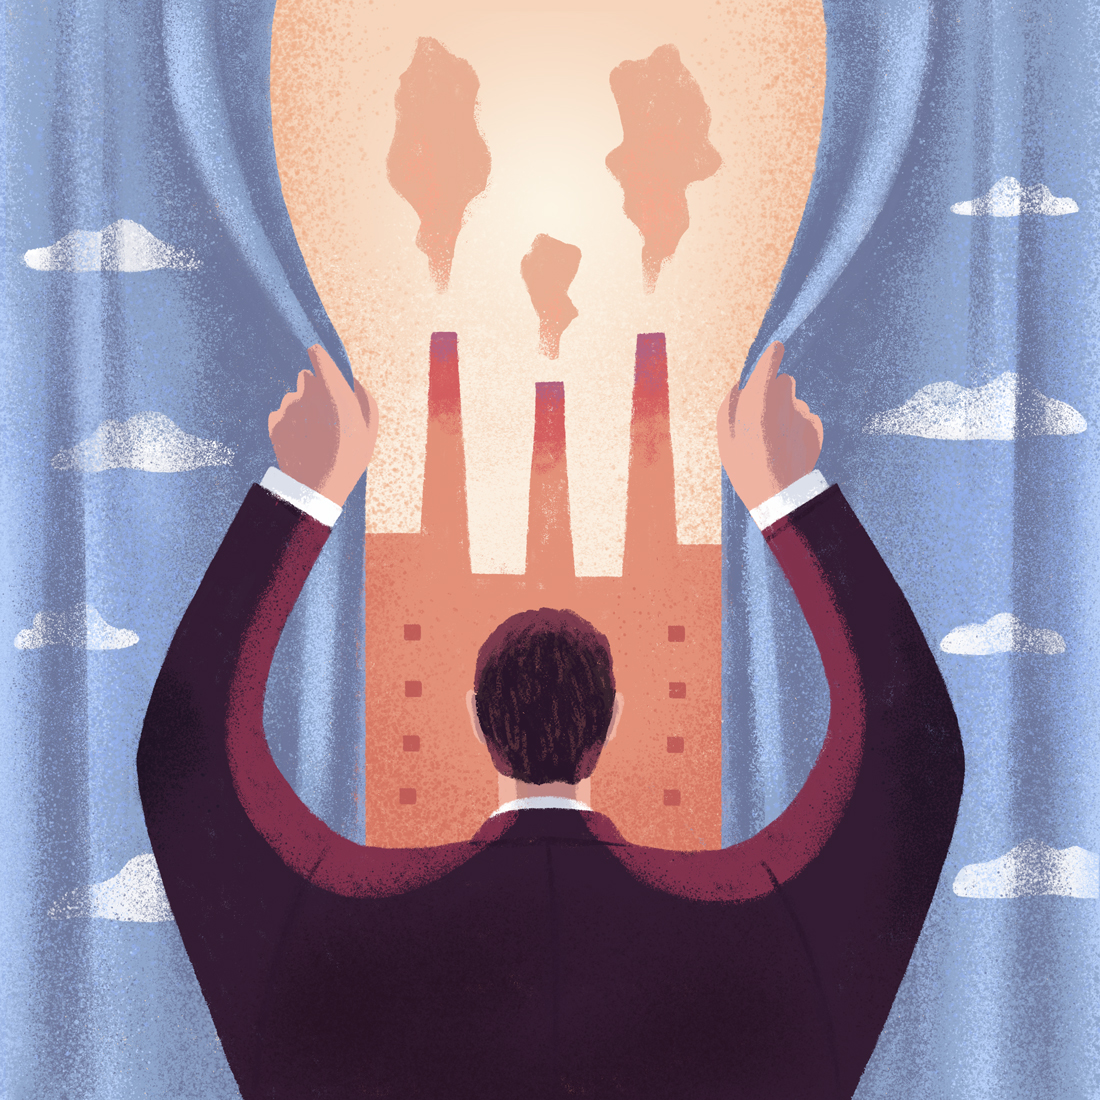 Editorial illustration by Quebec illustrator Marie-Joëlle Fournier featuring a character attempting to conceal the pollution generated by their company by closing a curtain that creates the illusion of a blue cloudy sky